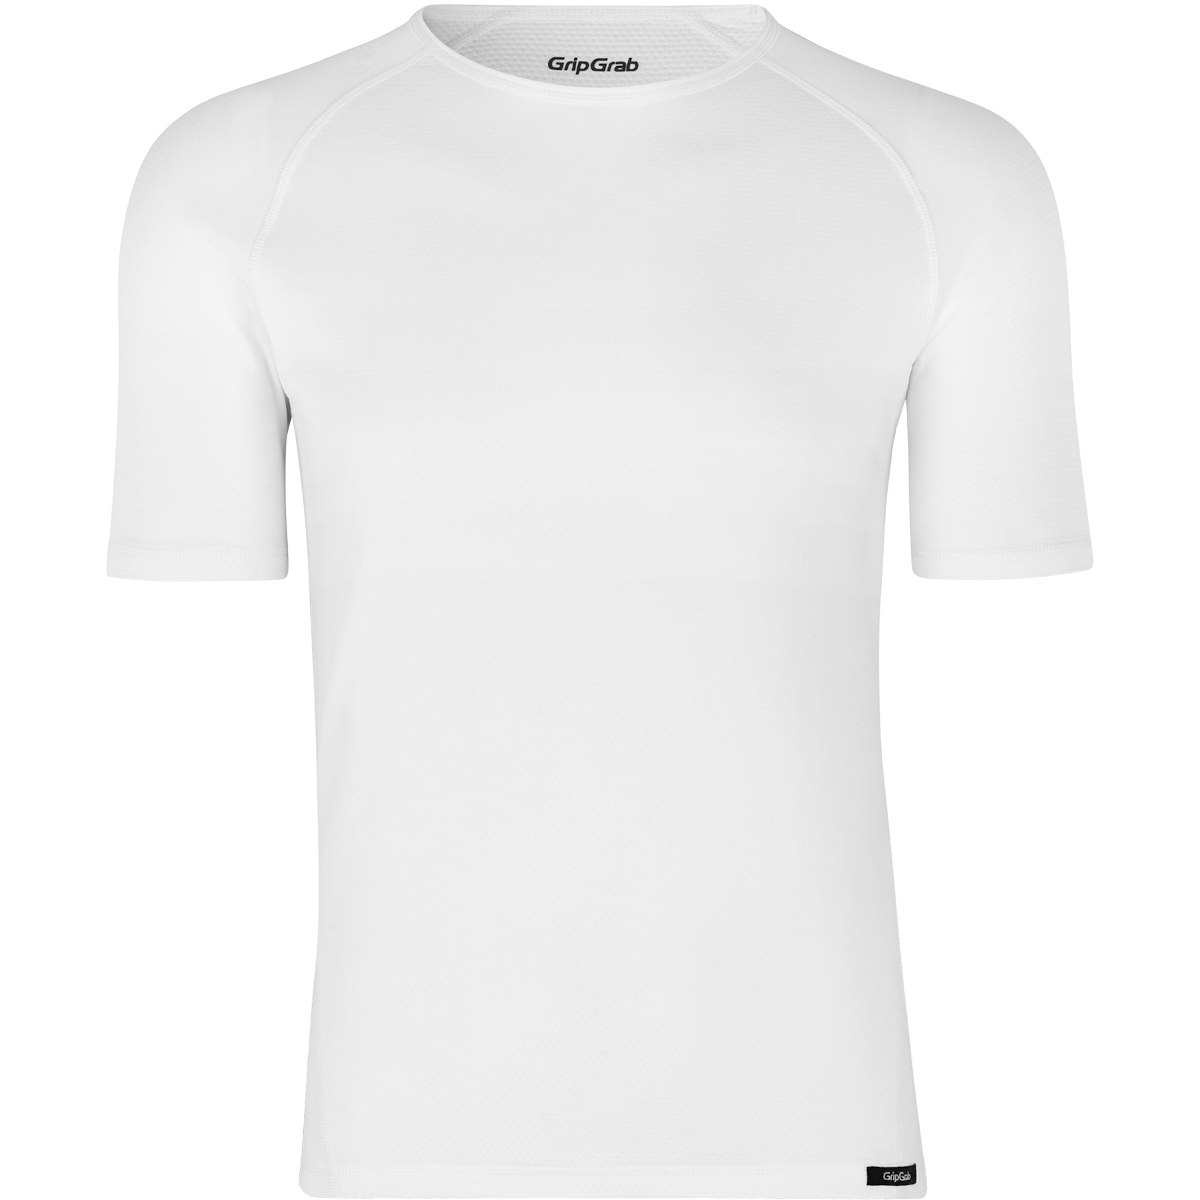 Picture of GripGrab Ride Thermal Short Sleeve Base Layer - White